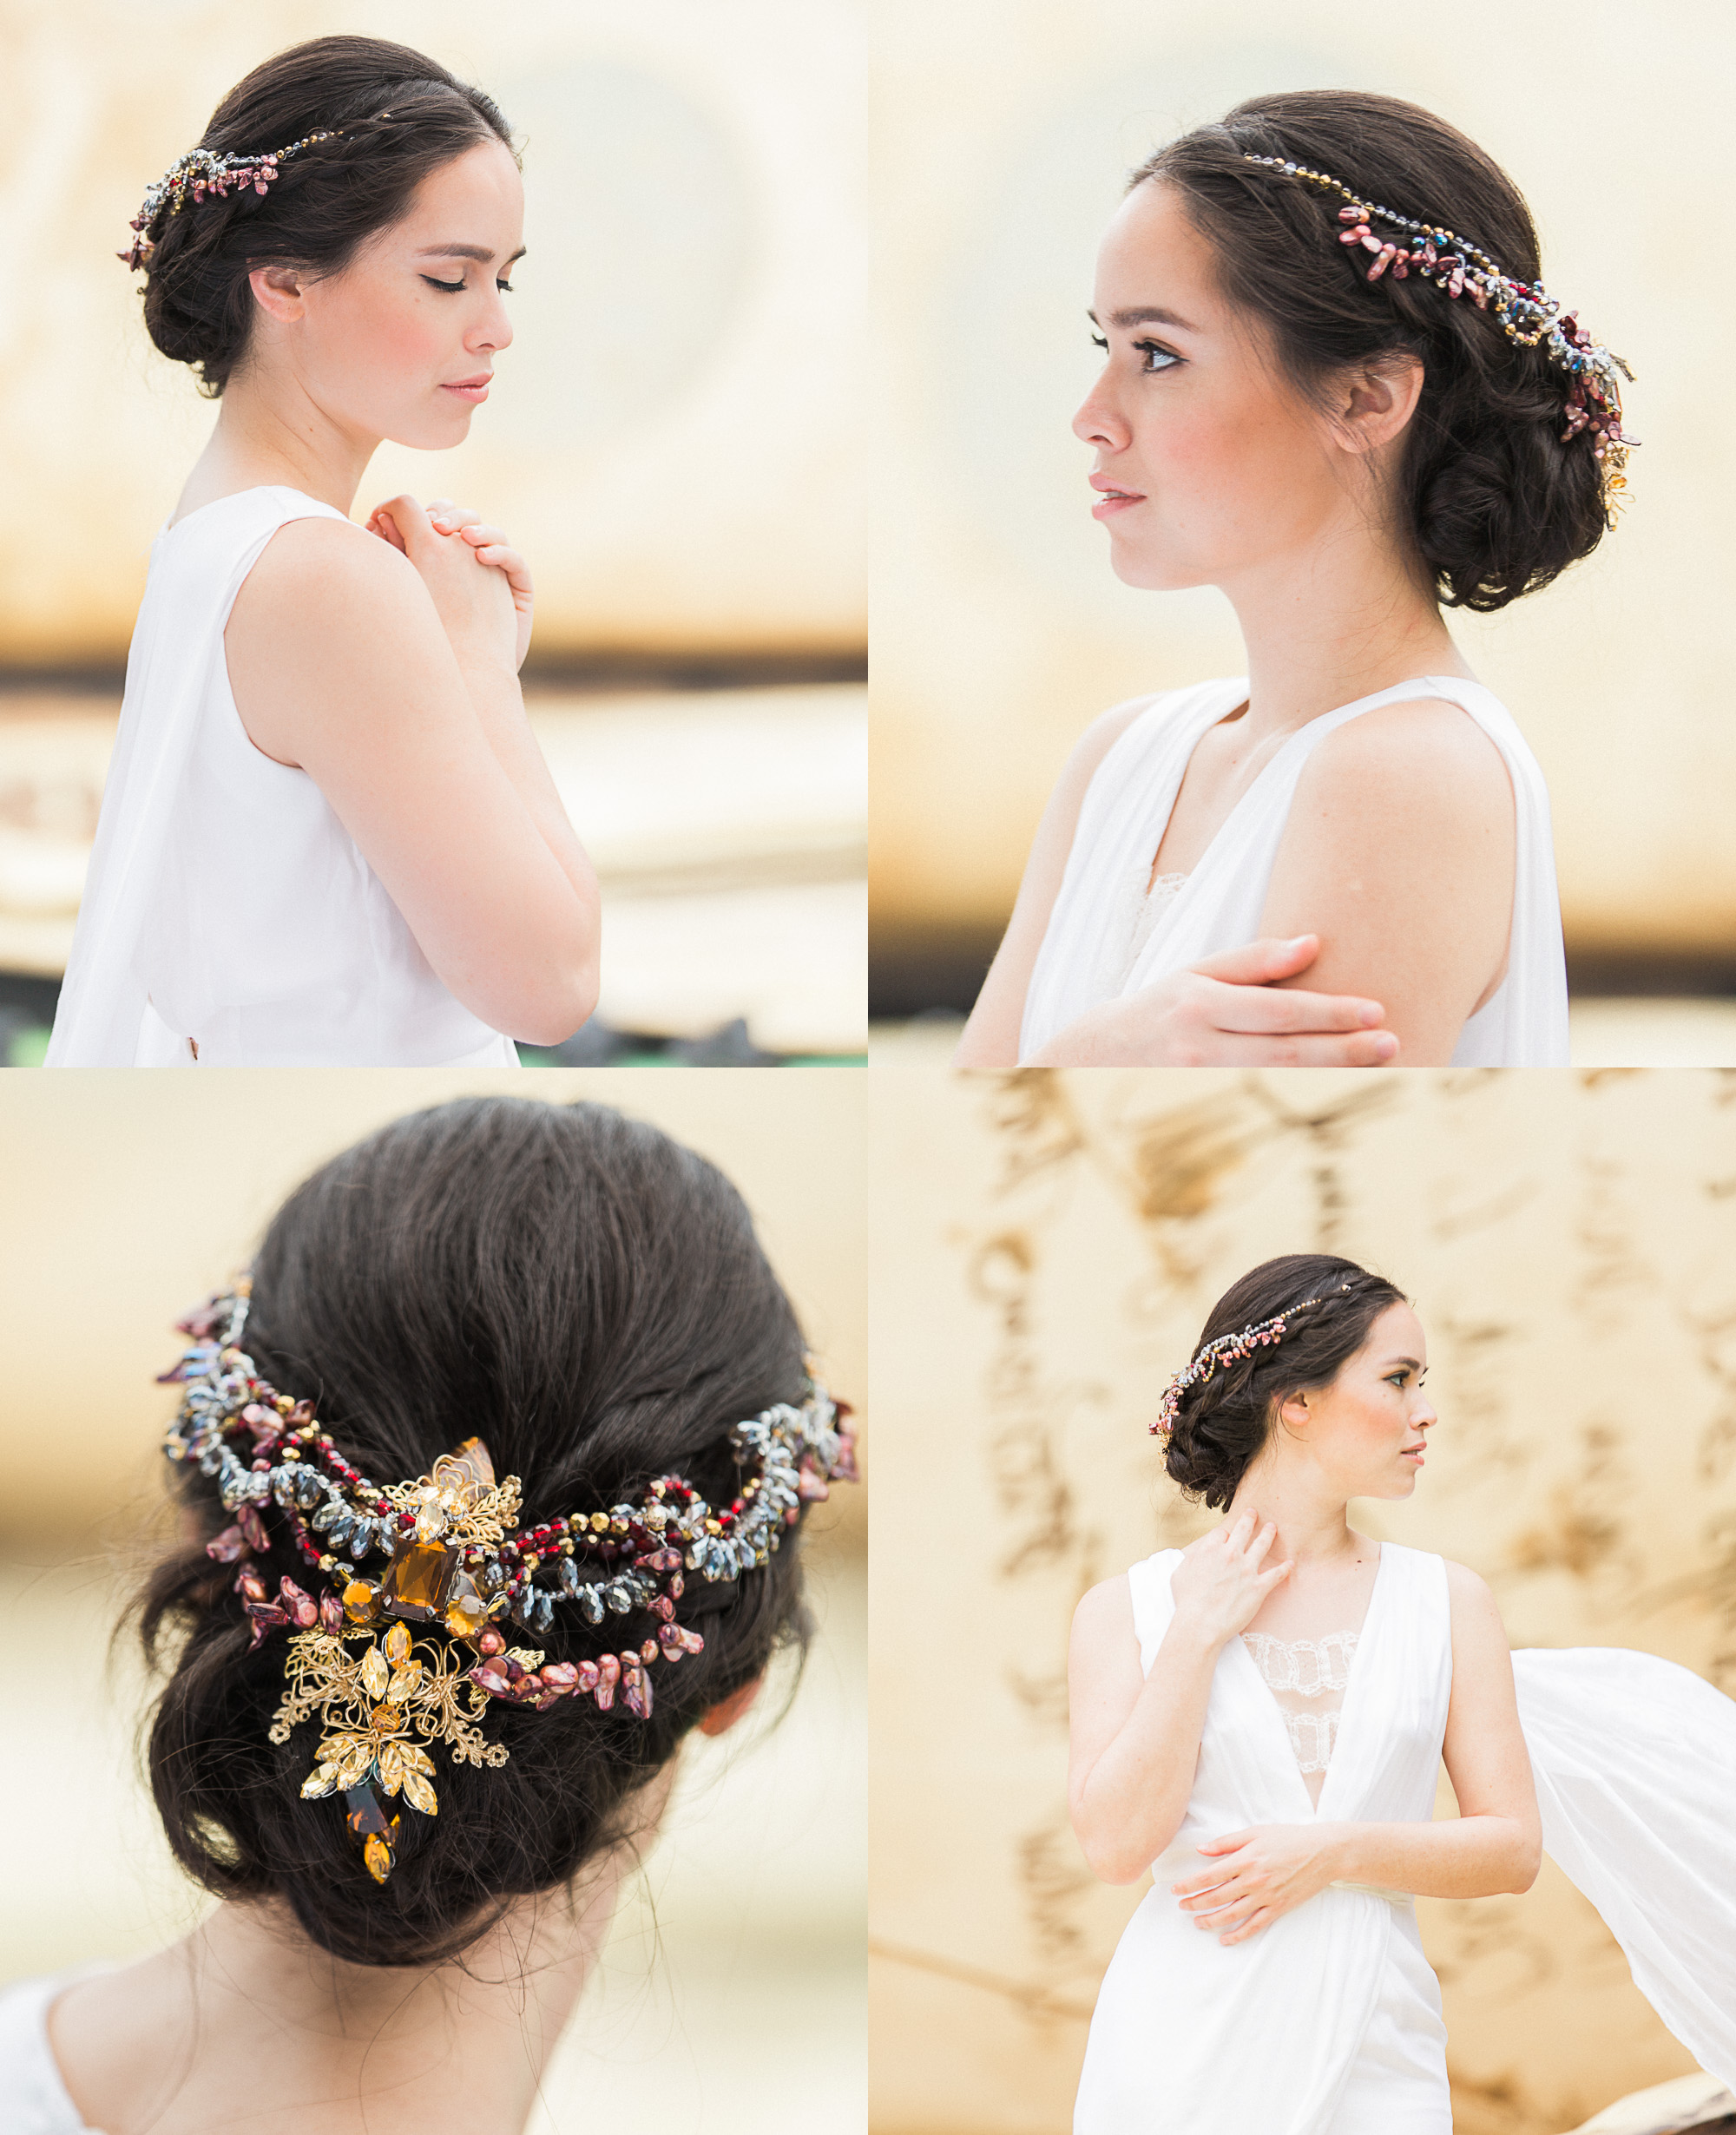 chen sands editorial bridal shoot shakespeare the wedding scoop singapore collage 2.jpg